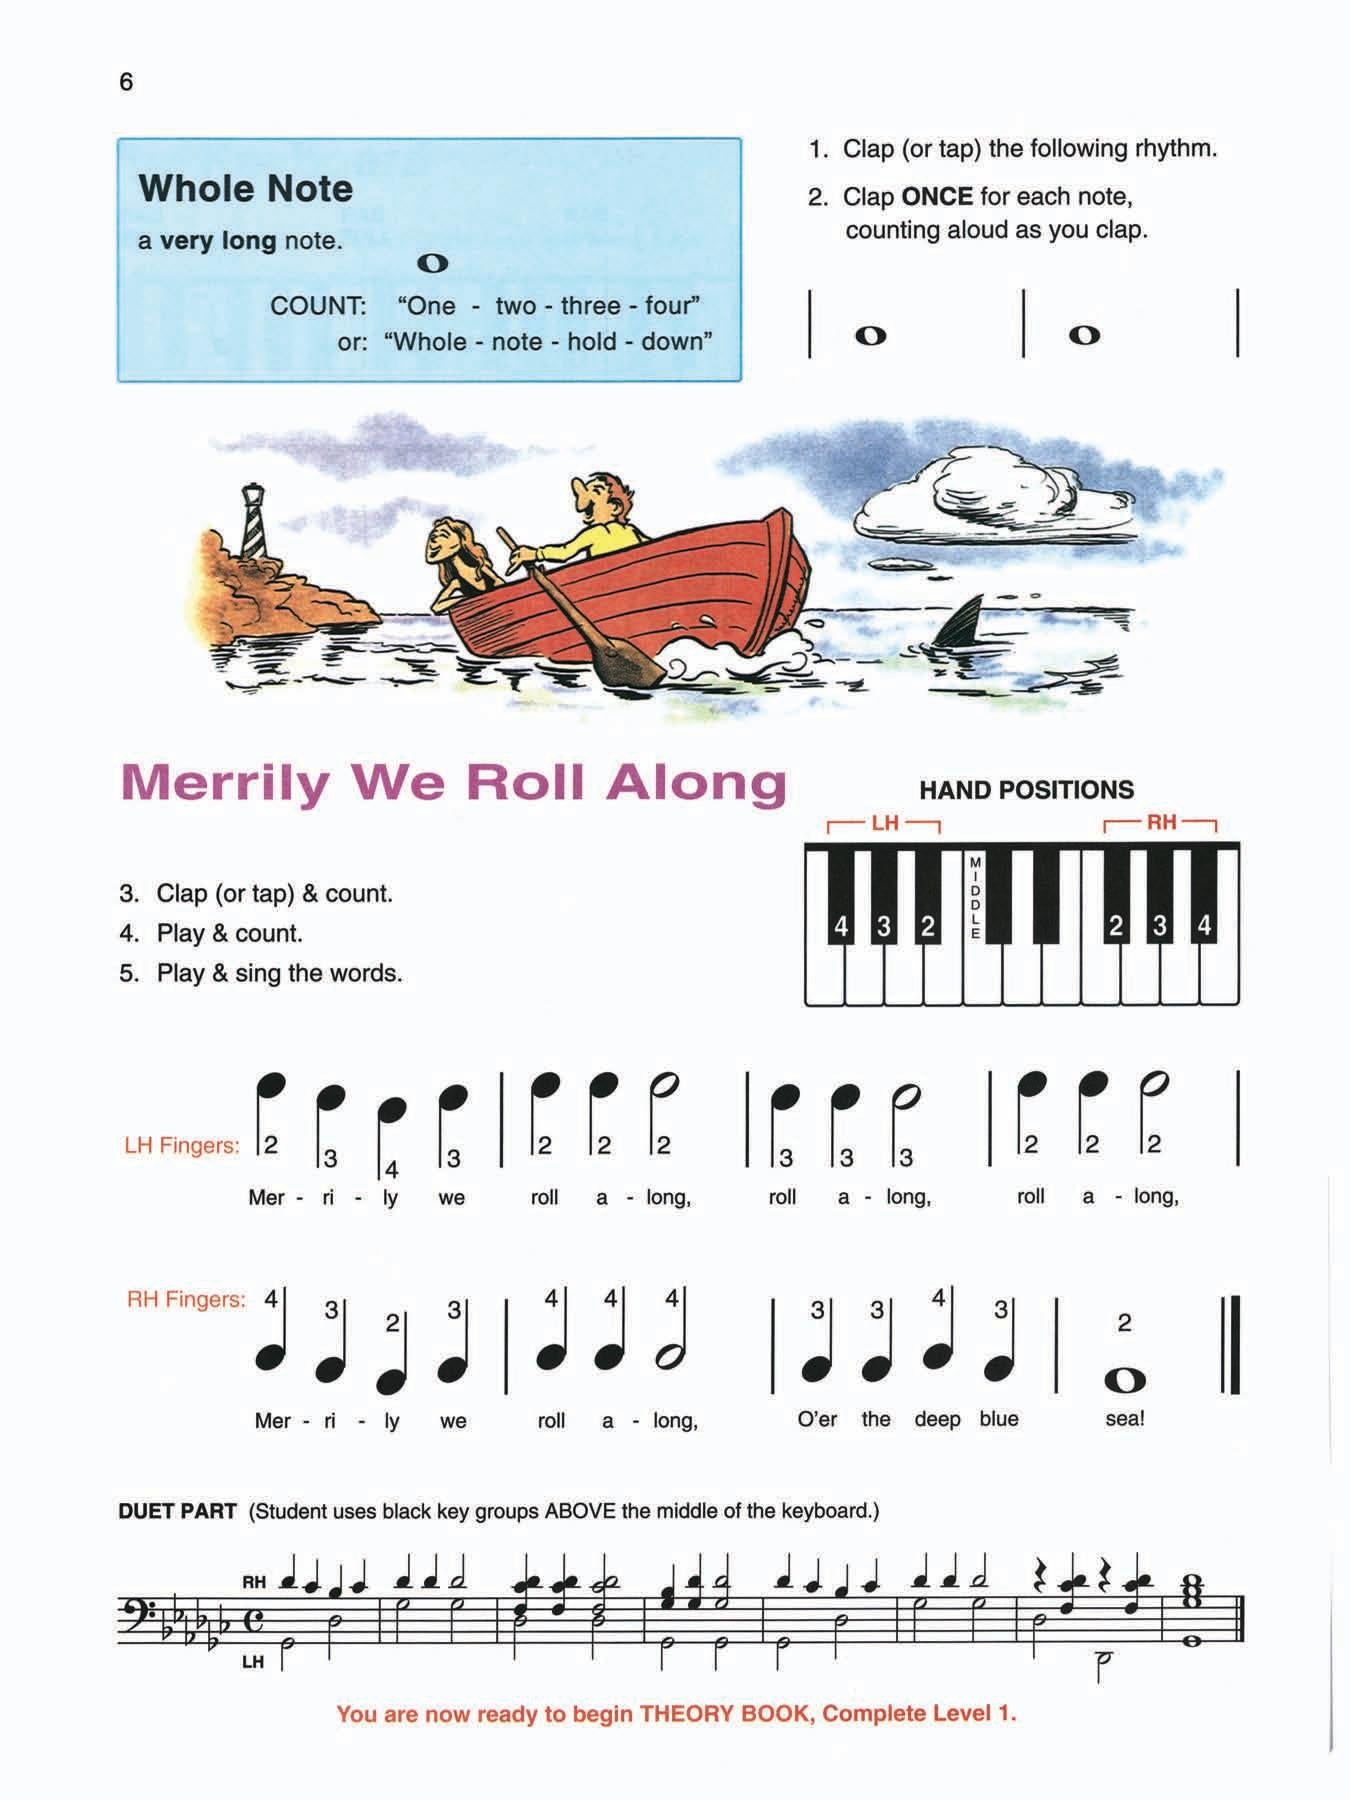 Alfred's Basic Piano Library: Lesson Book Complete 1